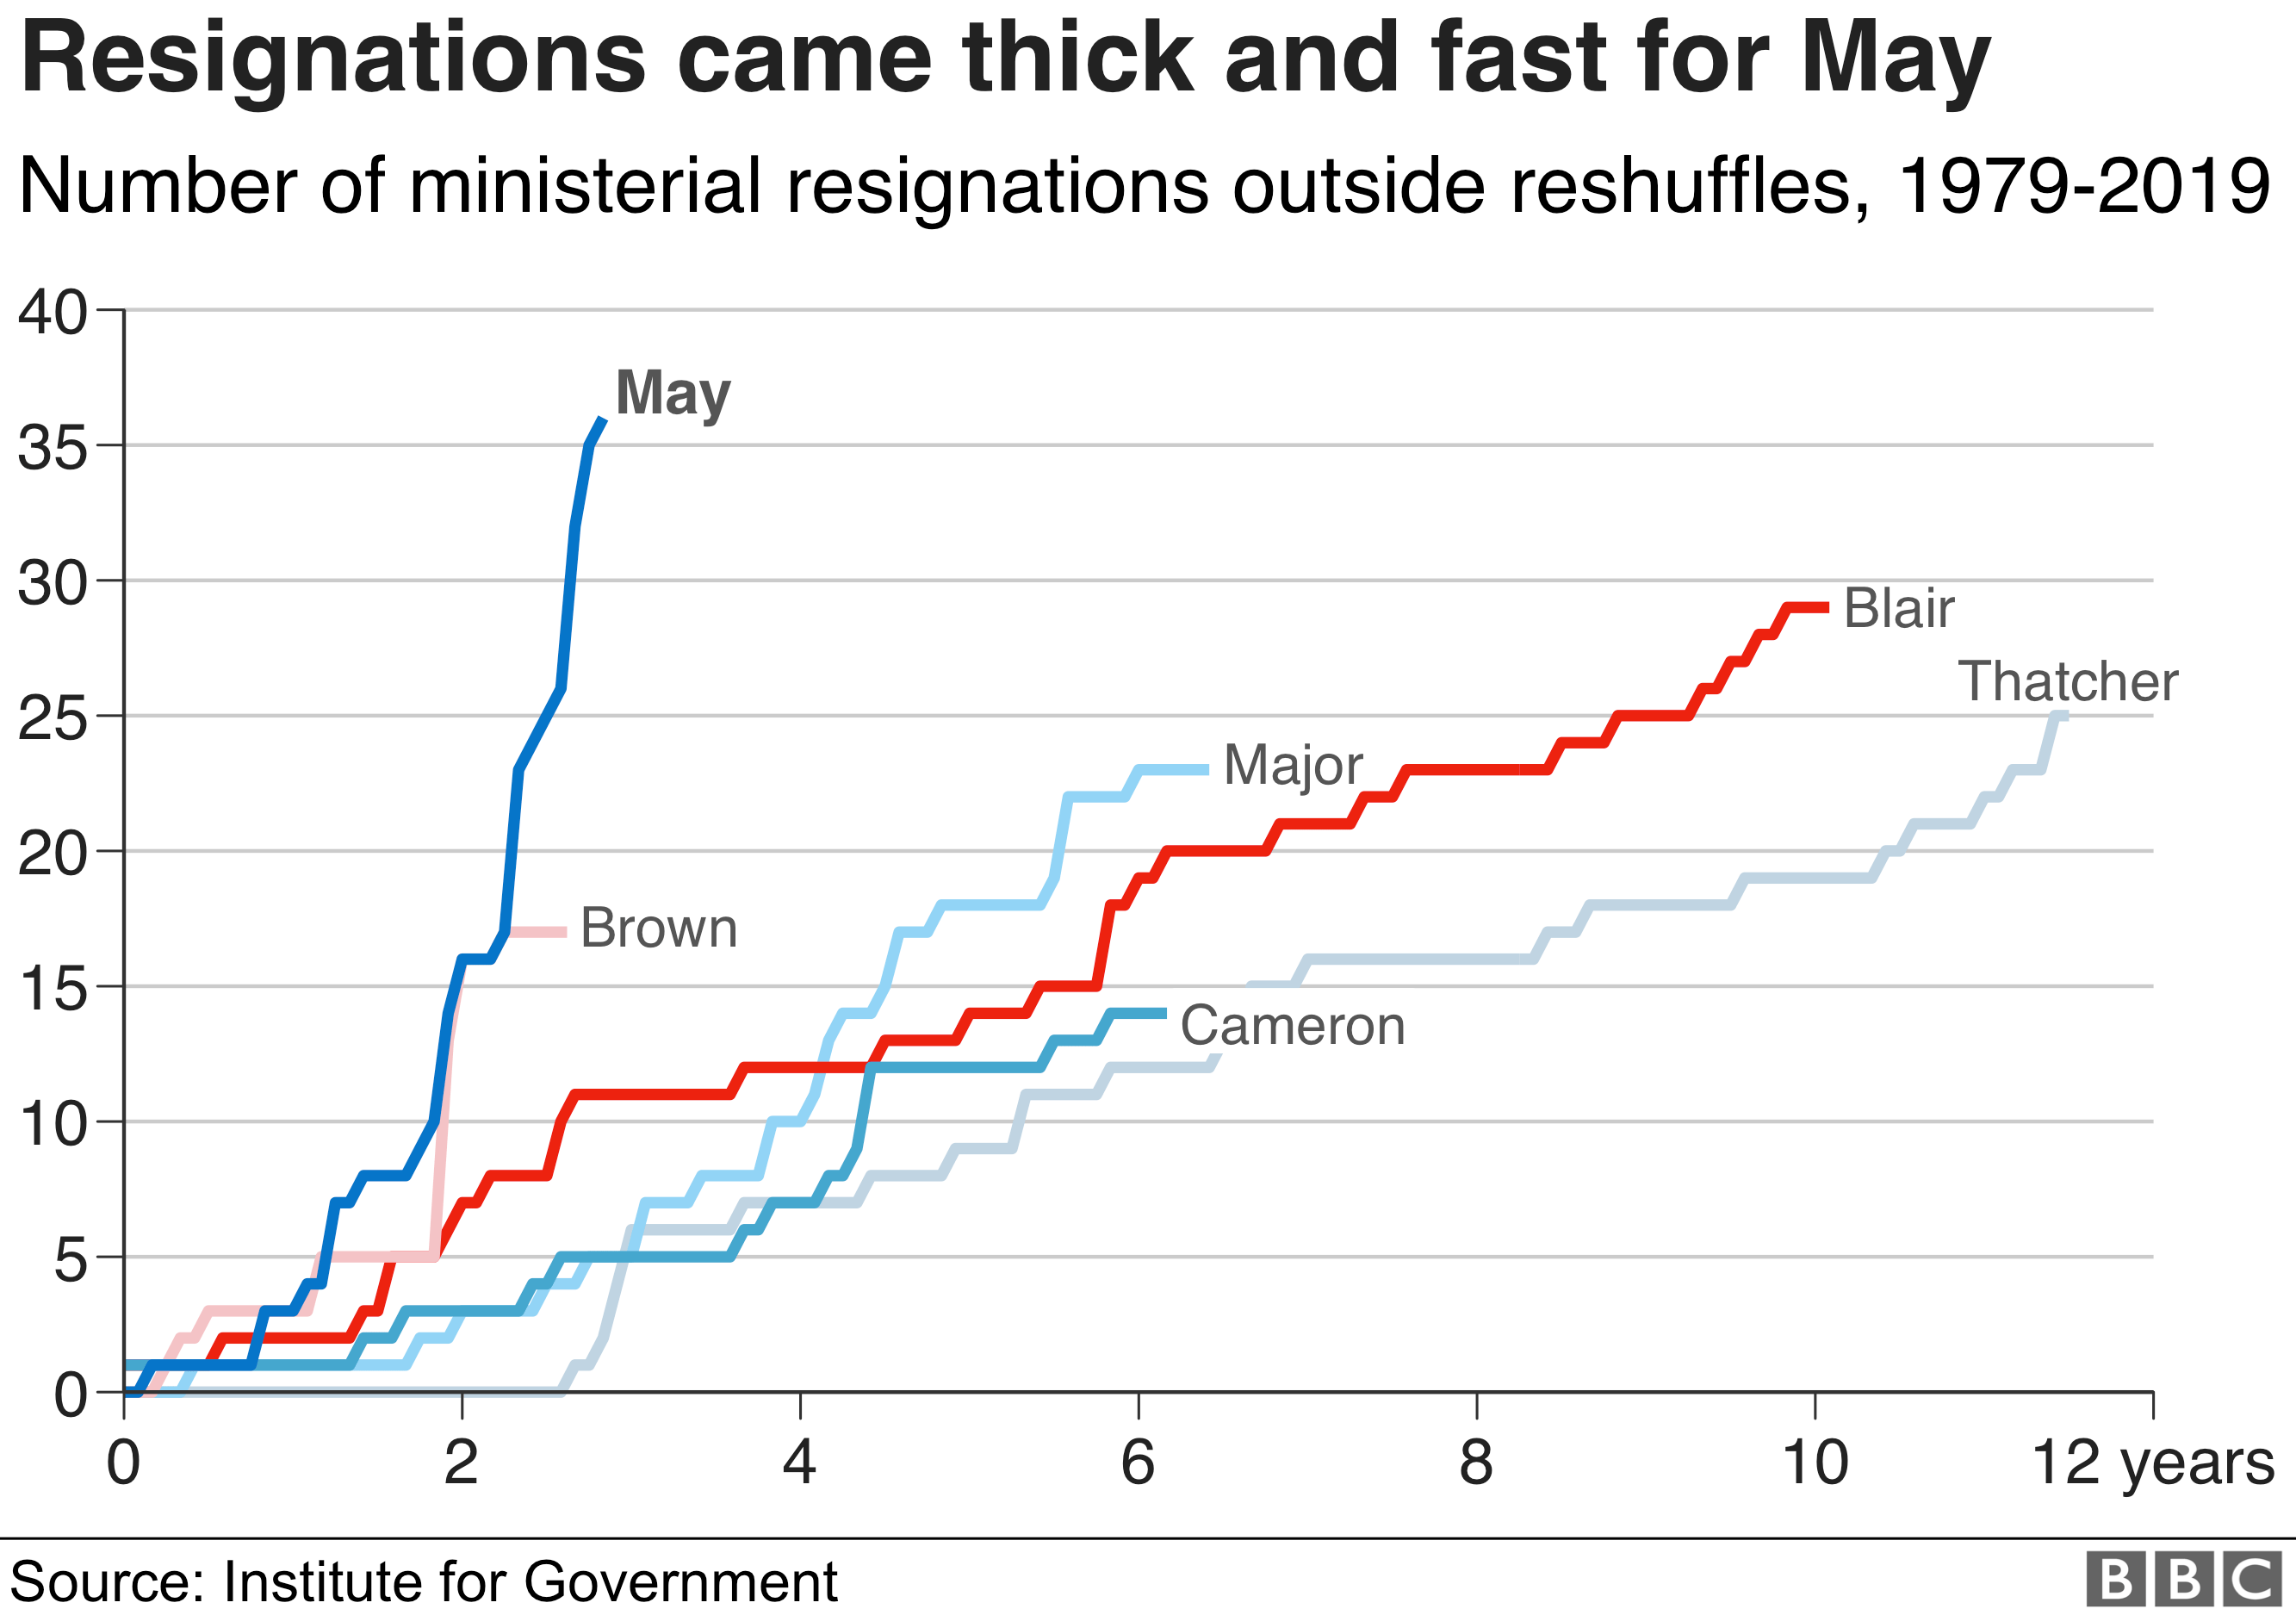 Chart showing how resignations have come thick and fast under May